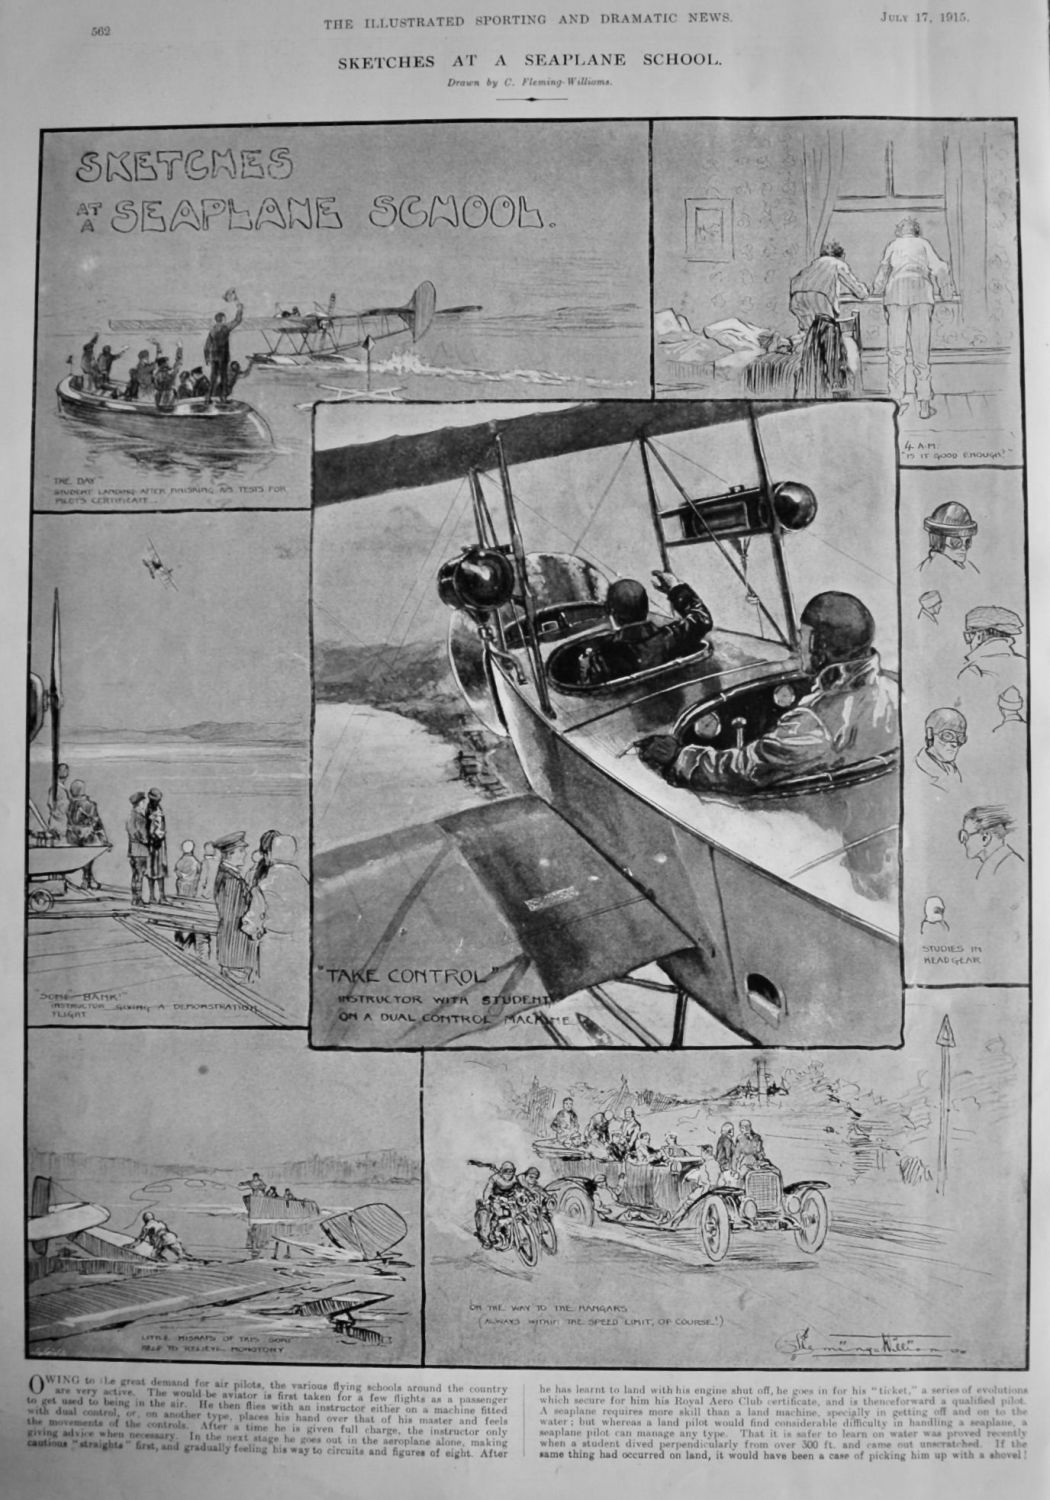 Sketches at a Seaplane School.  1915.